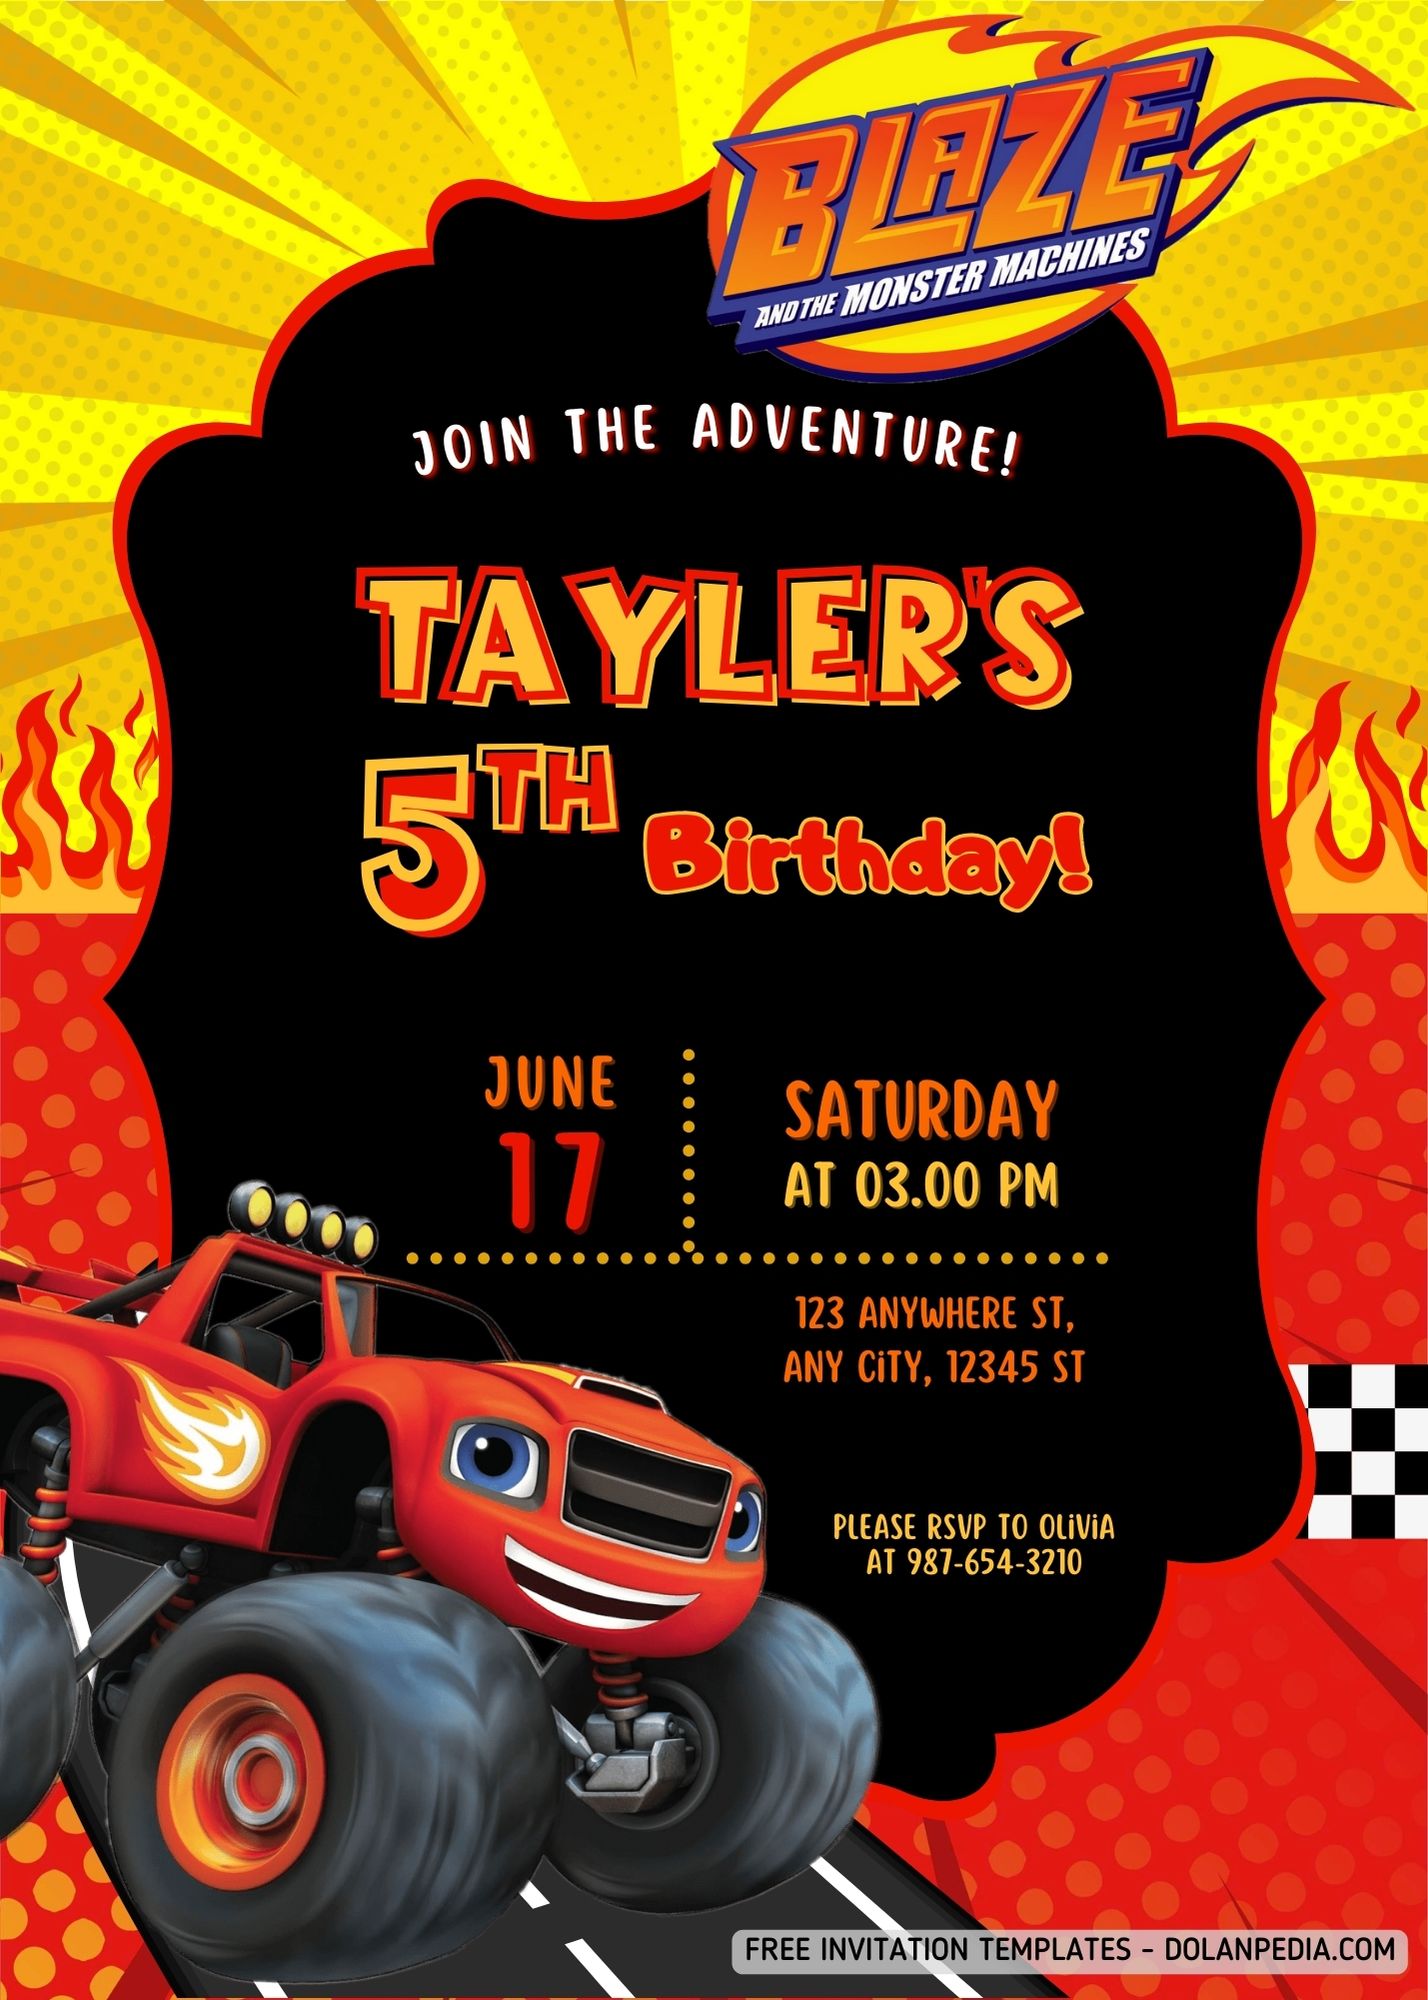 FREE Blaze & Monster Machines Outdoor Race Party Invitation Templates